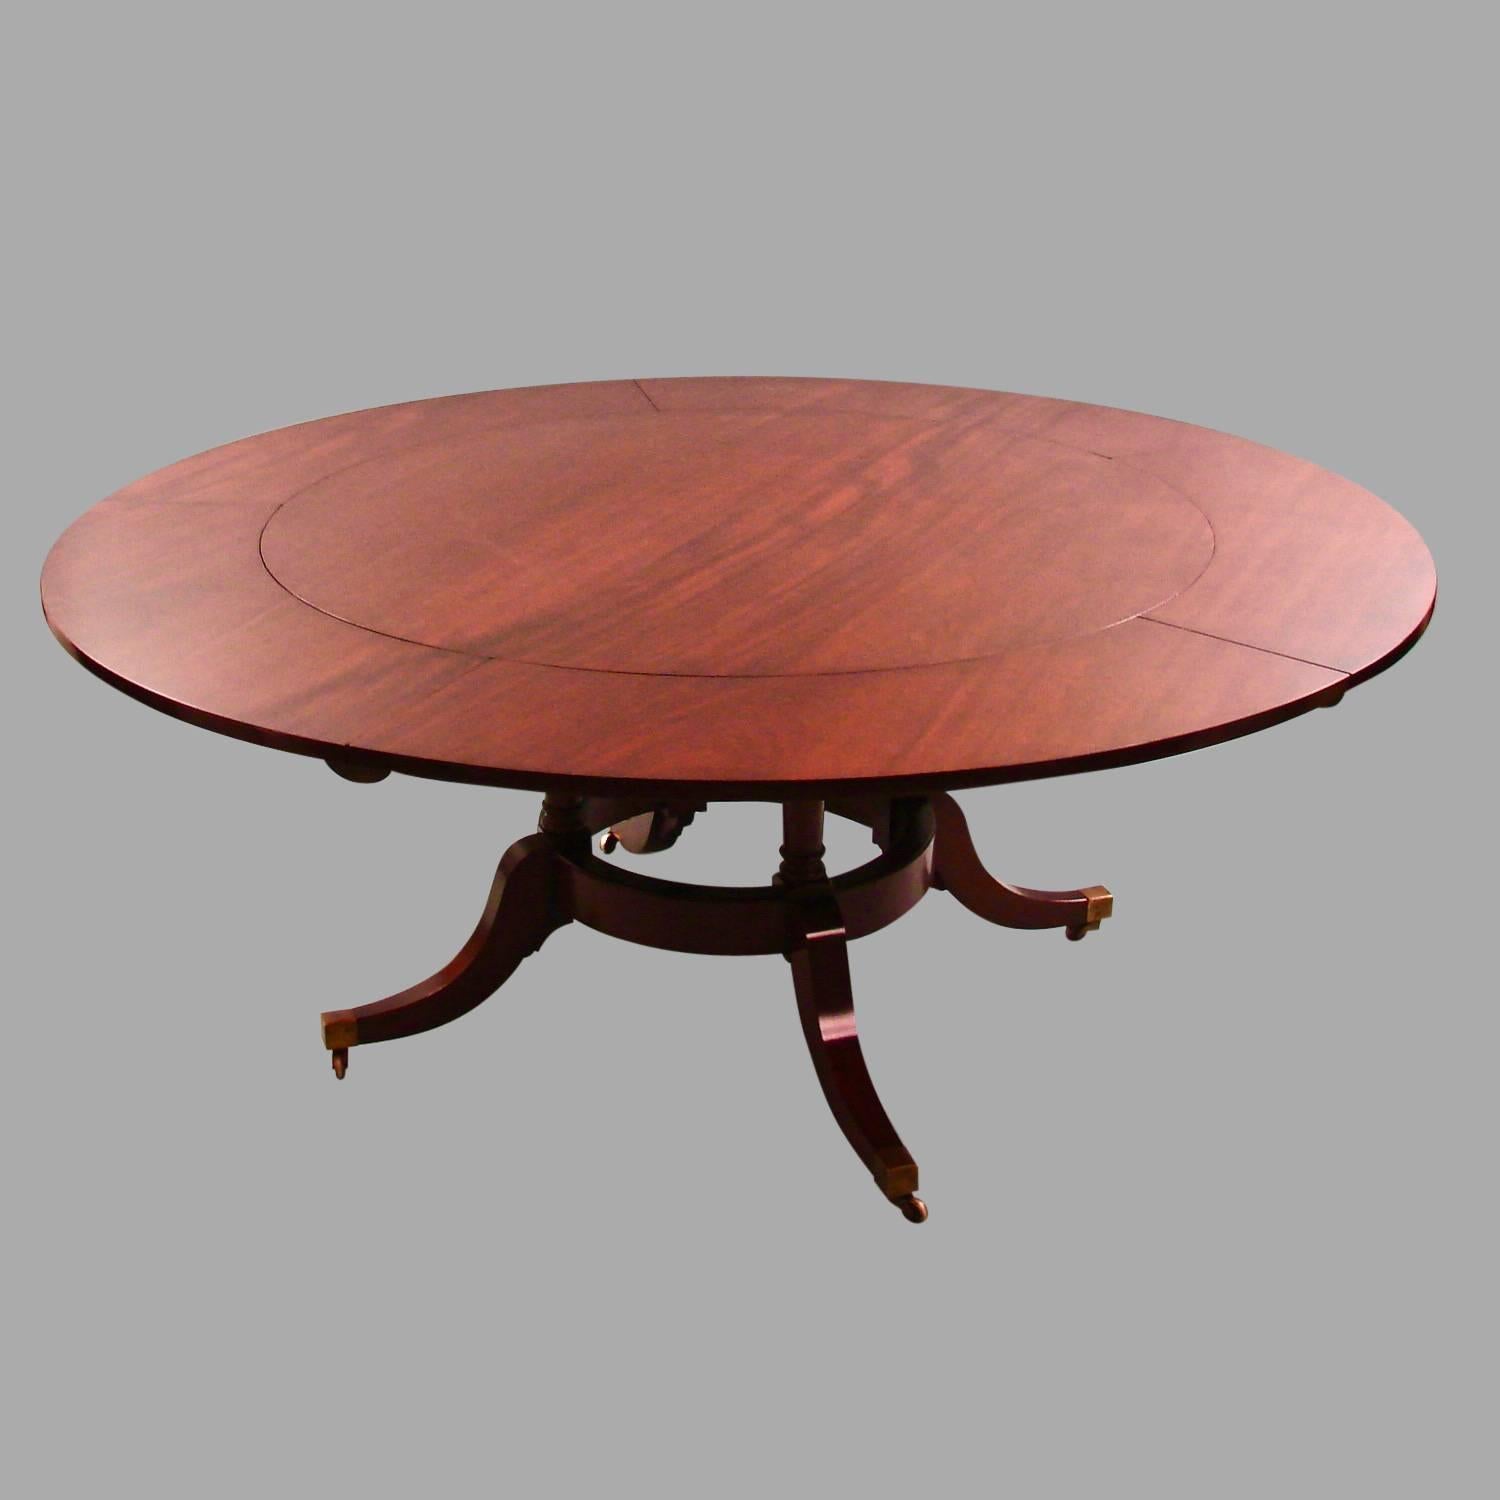 English Regency Style Mahogany Dining Table with Five Leaves